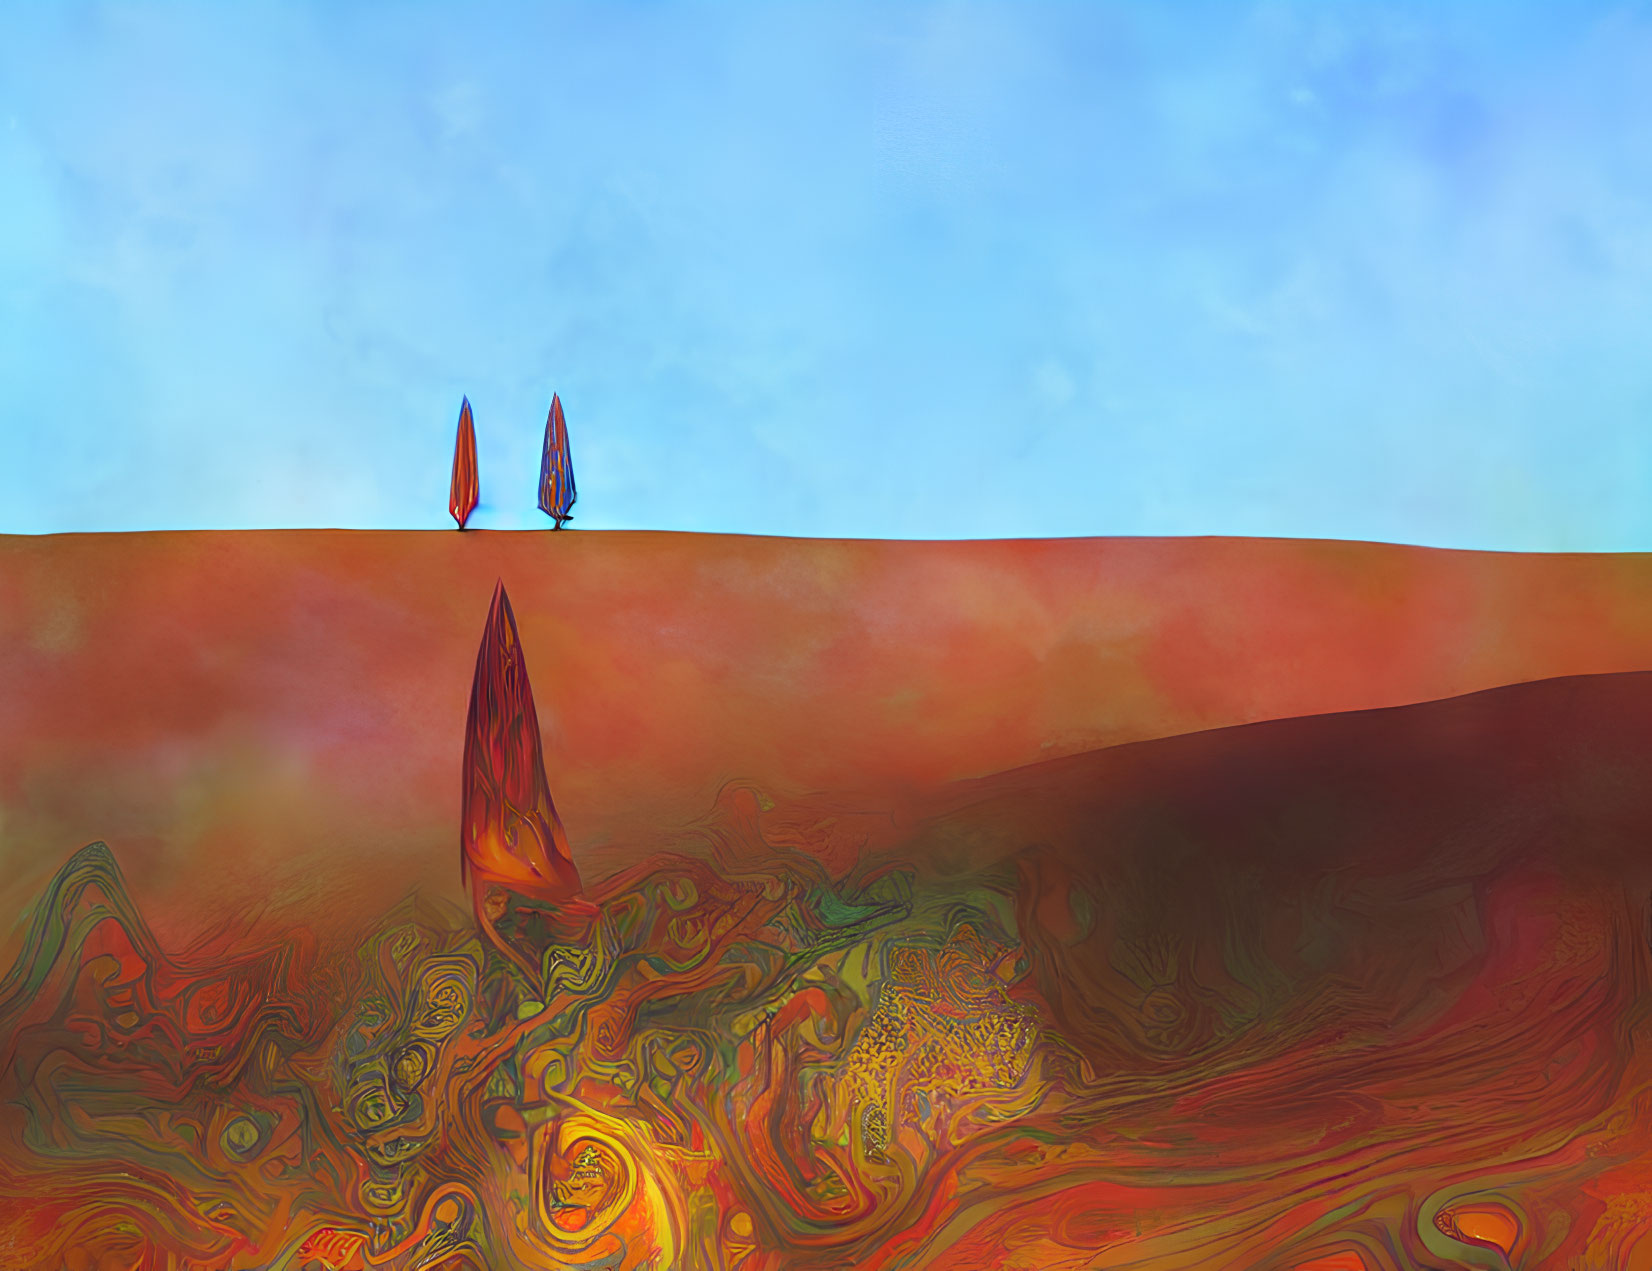 Vivid warm colors swirl in abstract digital artwork with sail-like figures